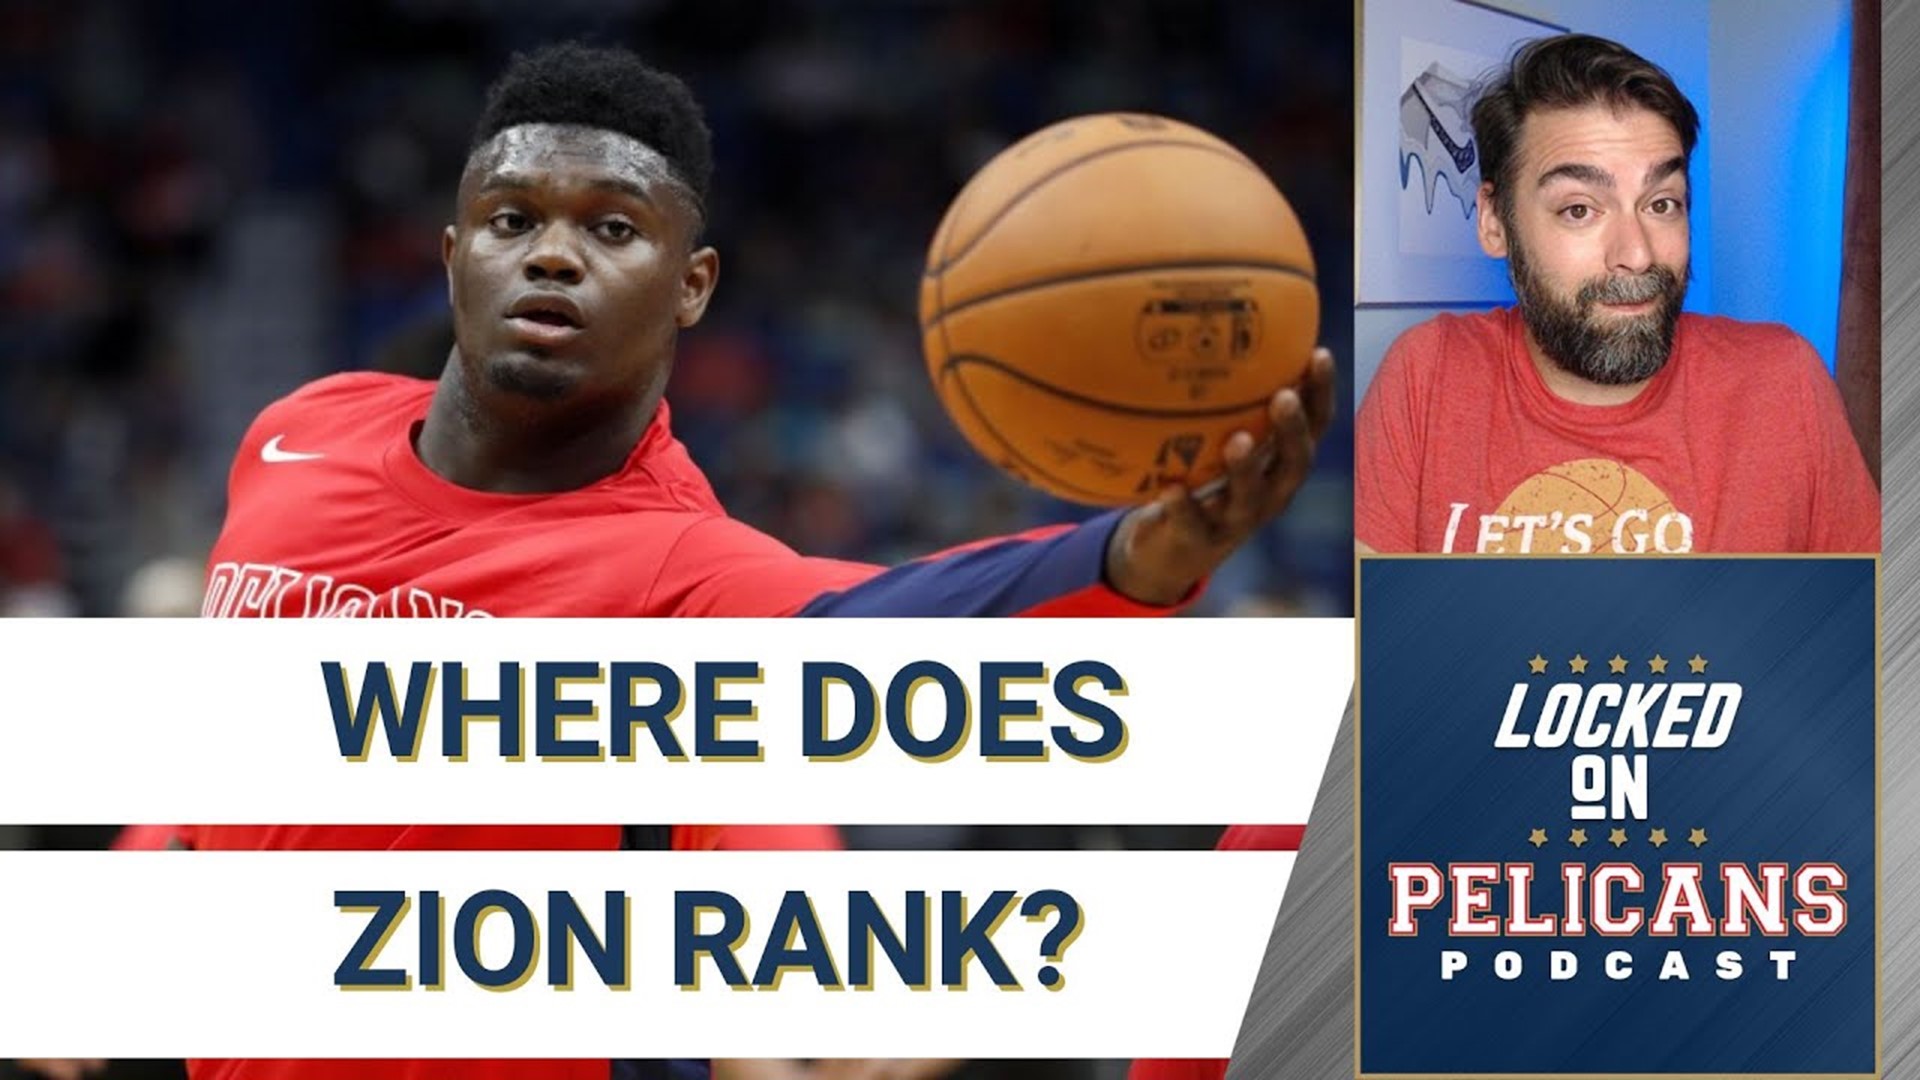 With Zion Williamson as the best player on the New Orleans Pelicans (it's close between him and Brandon Ingram) where does he rank in the NBA?